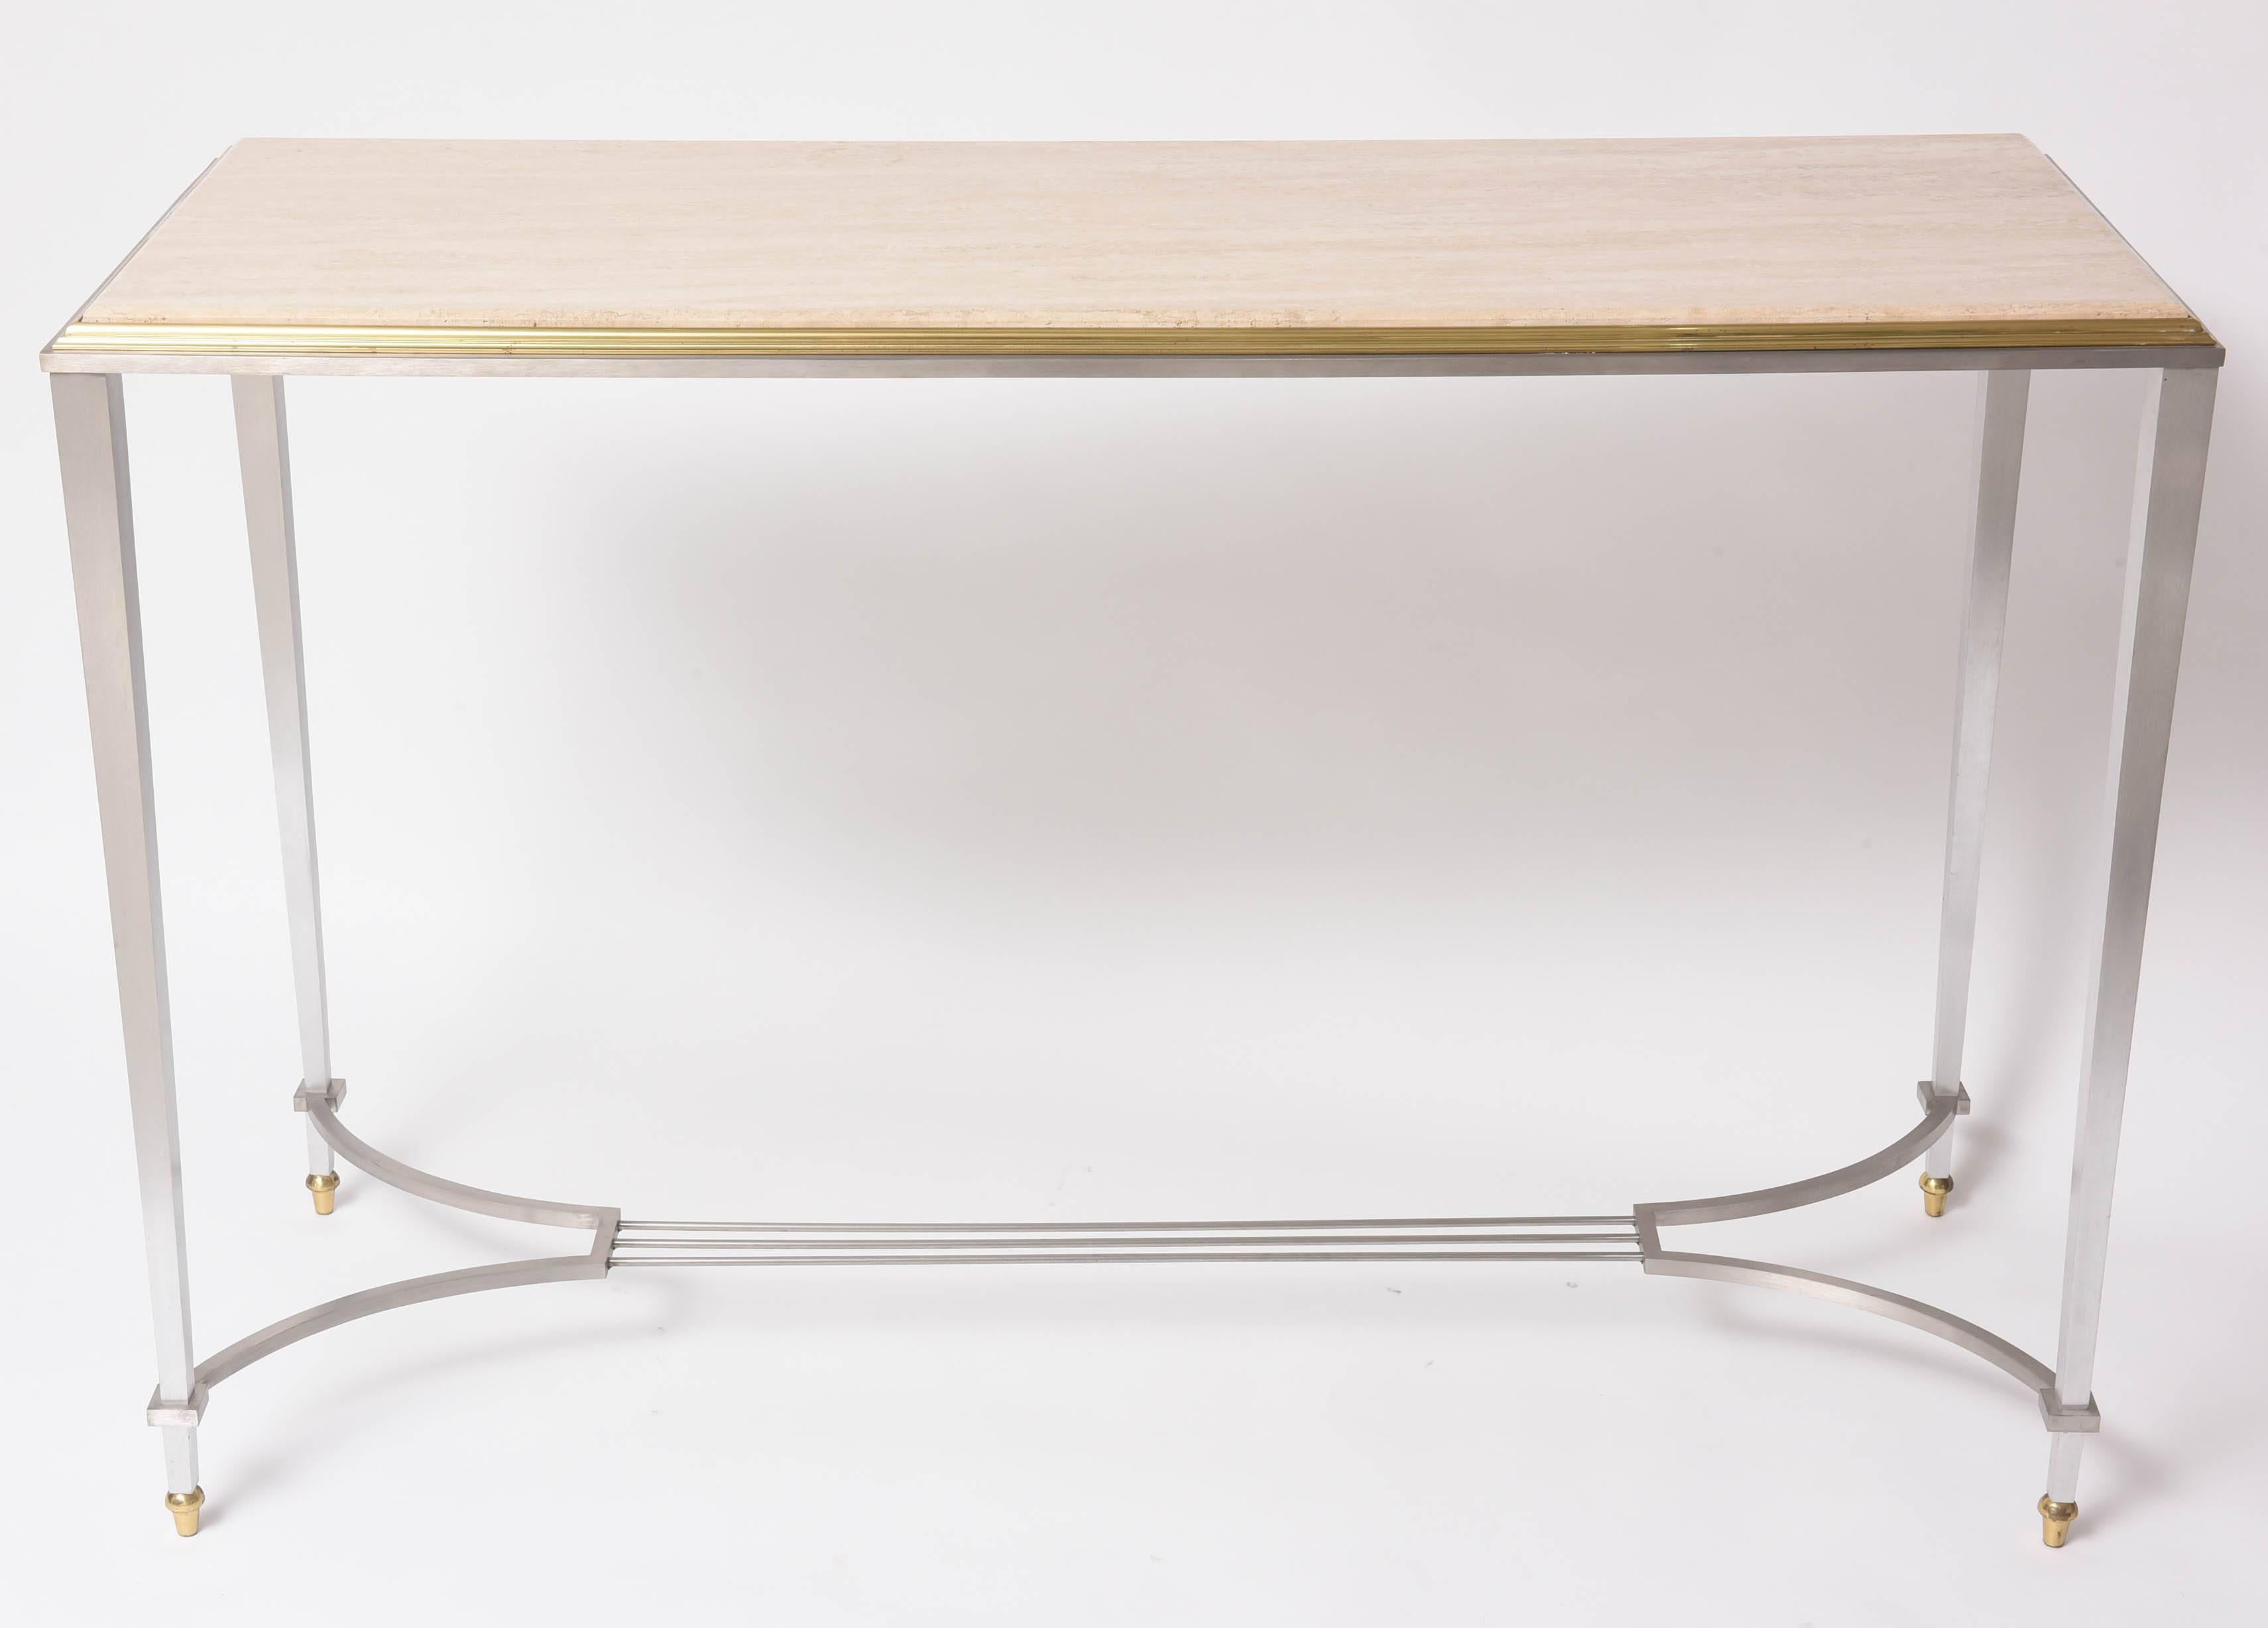 This stylish console is very much in the style of pieces created by the firm Maison Jansen. The materials are of the highest quality and its forms is quite lite and yet strong in appearance. 

